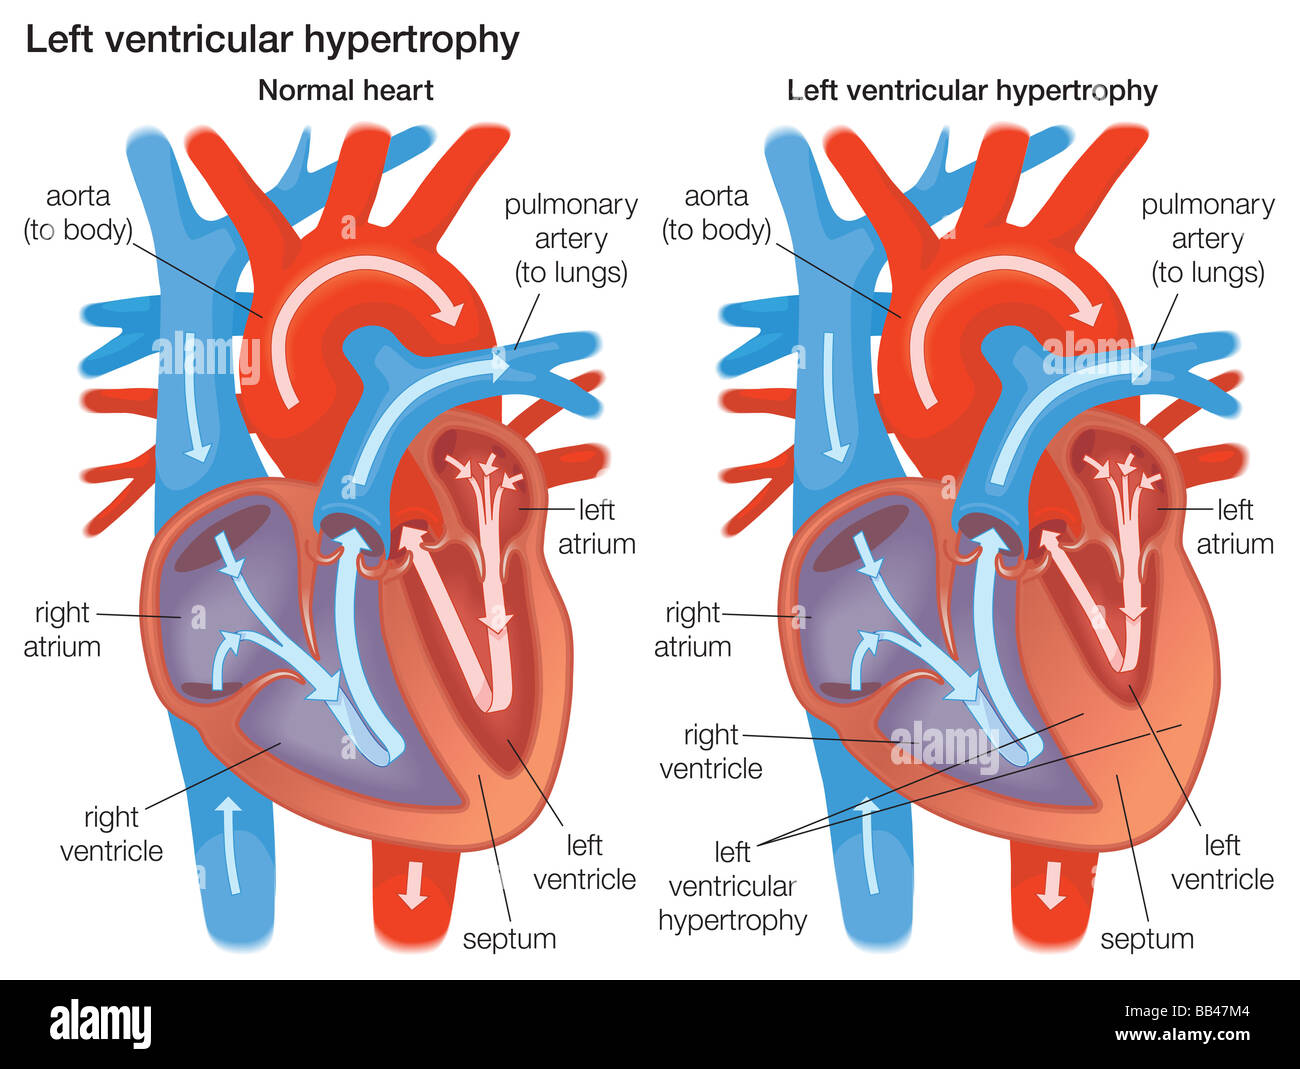 Cross section comparing the left ventricular wall of normal heart to ...